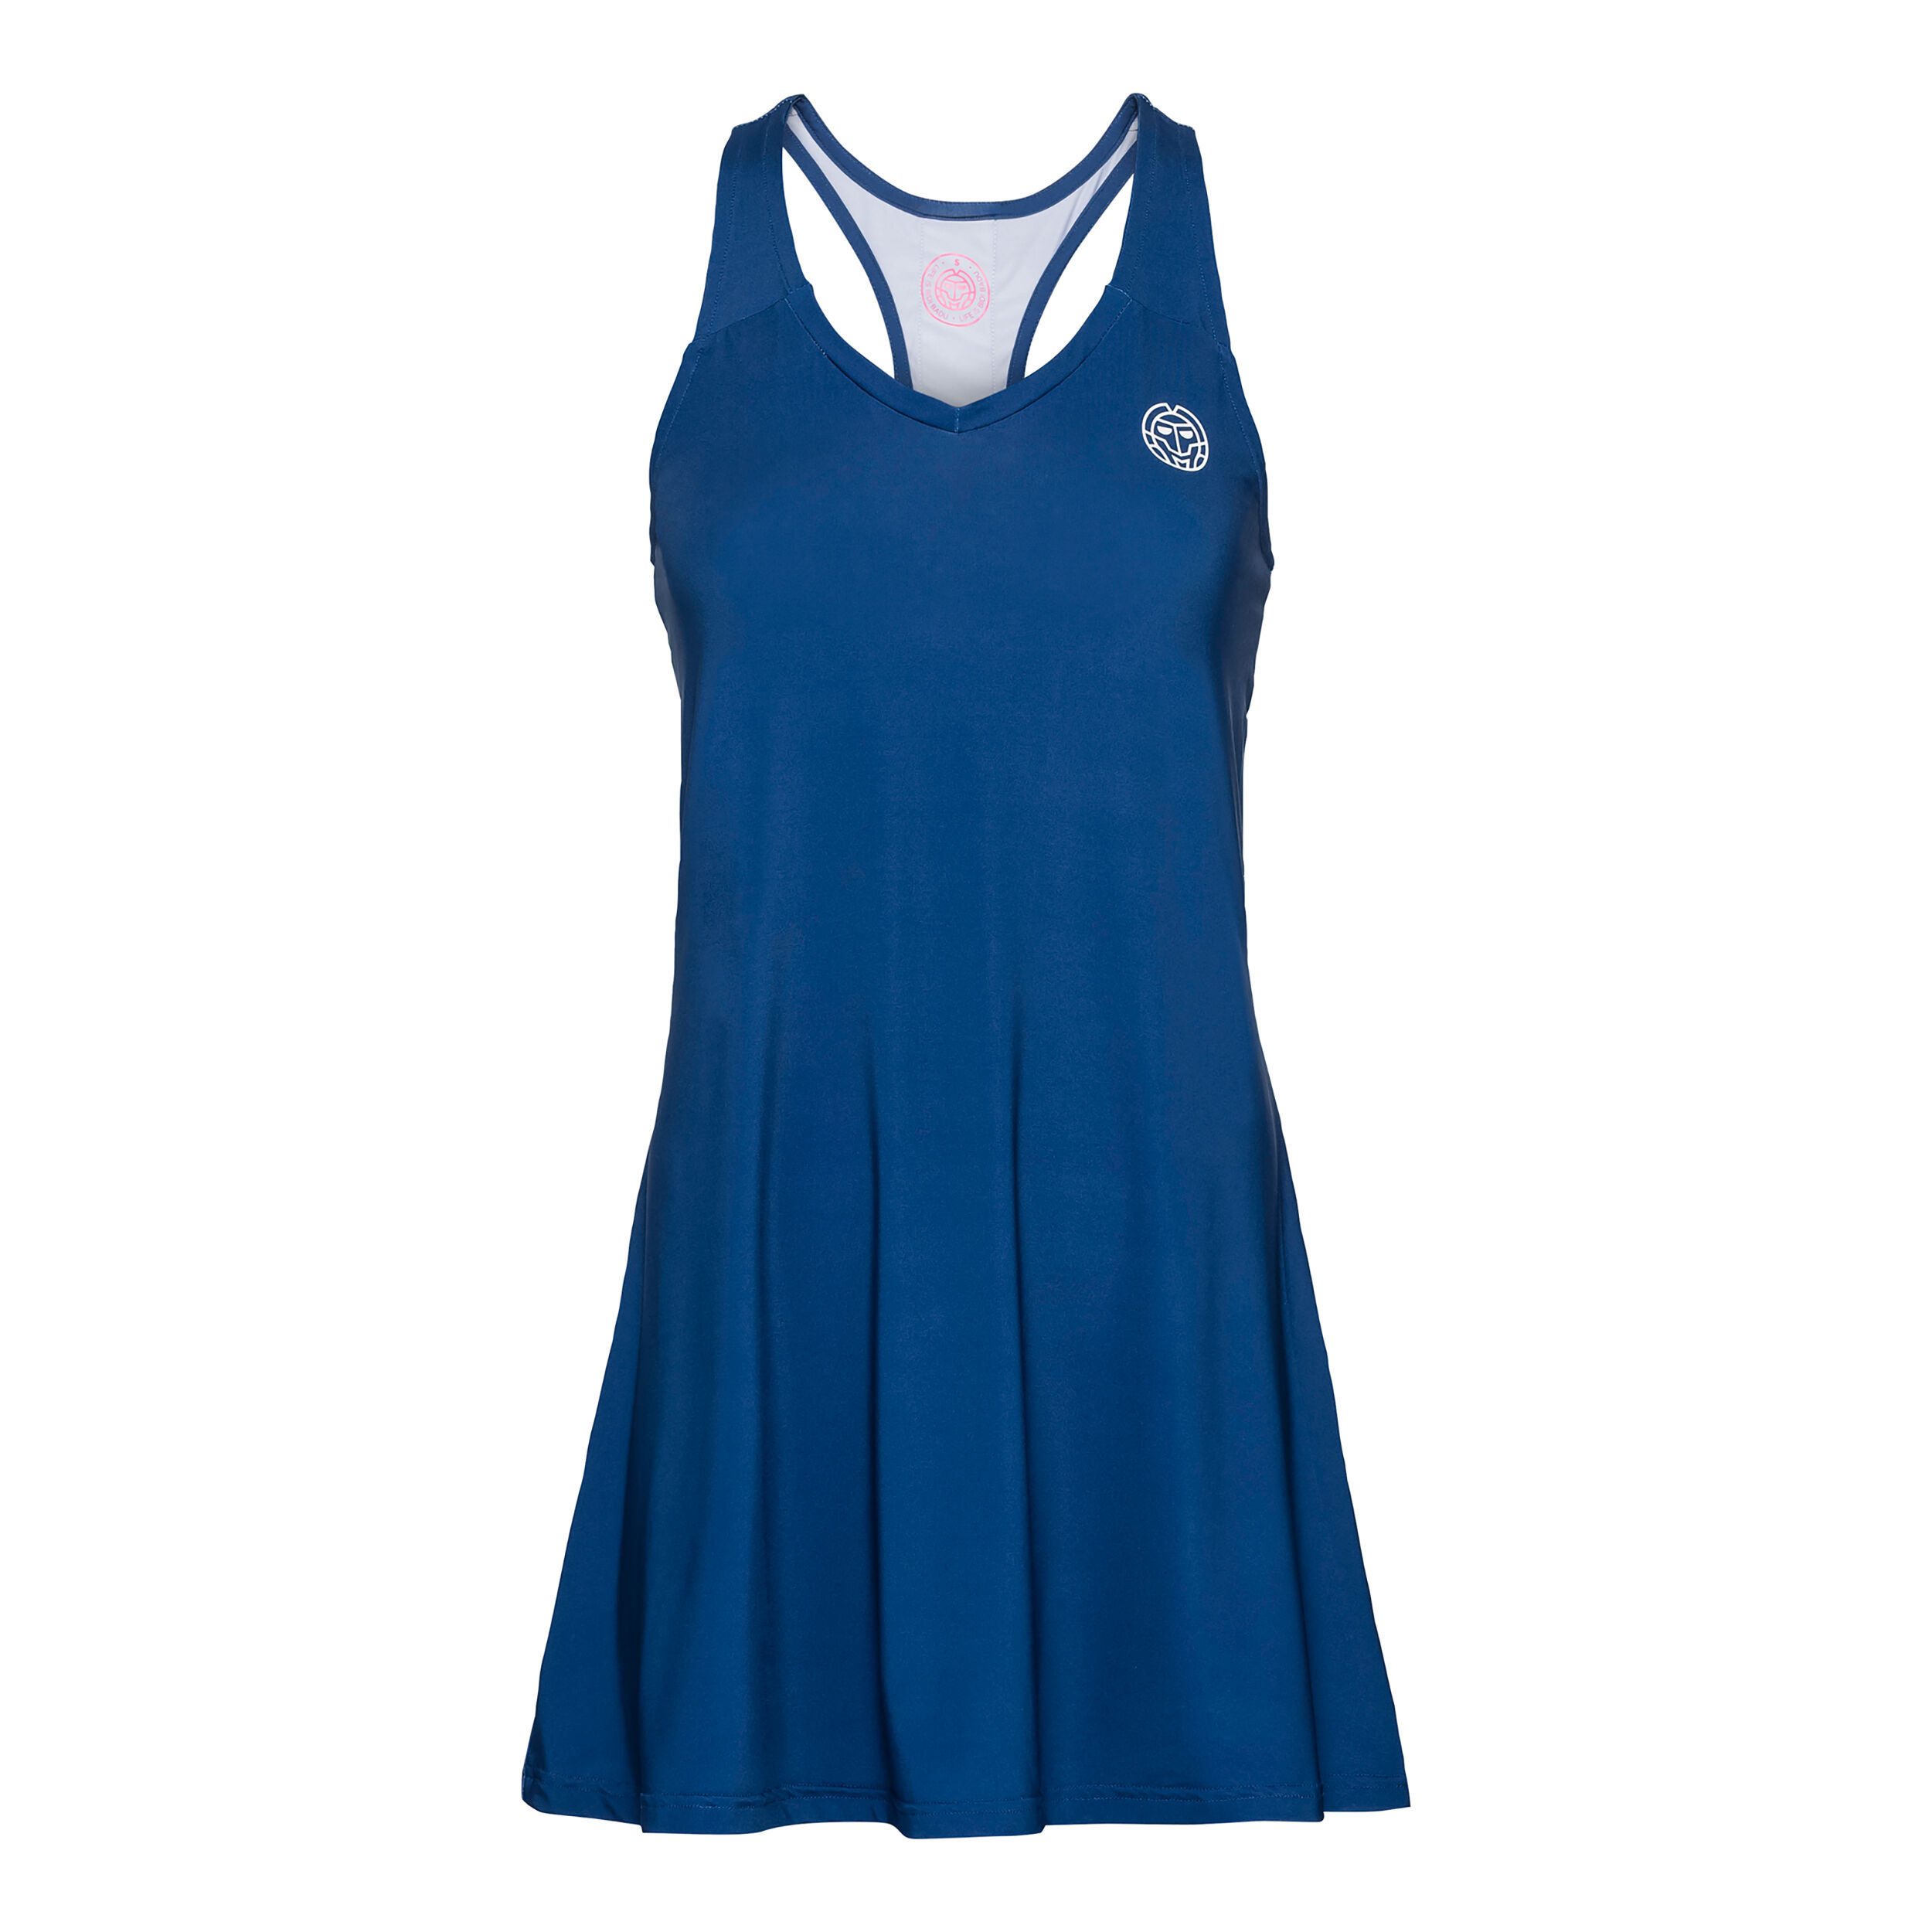 Under Armour Womens Tennis Dress 1290848 410 Size Large for sale online 